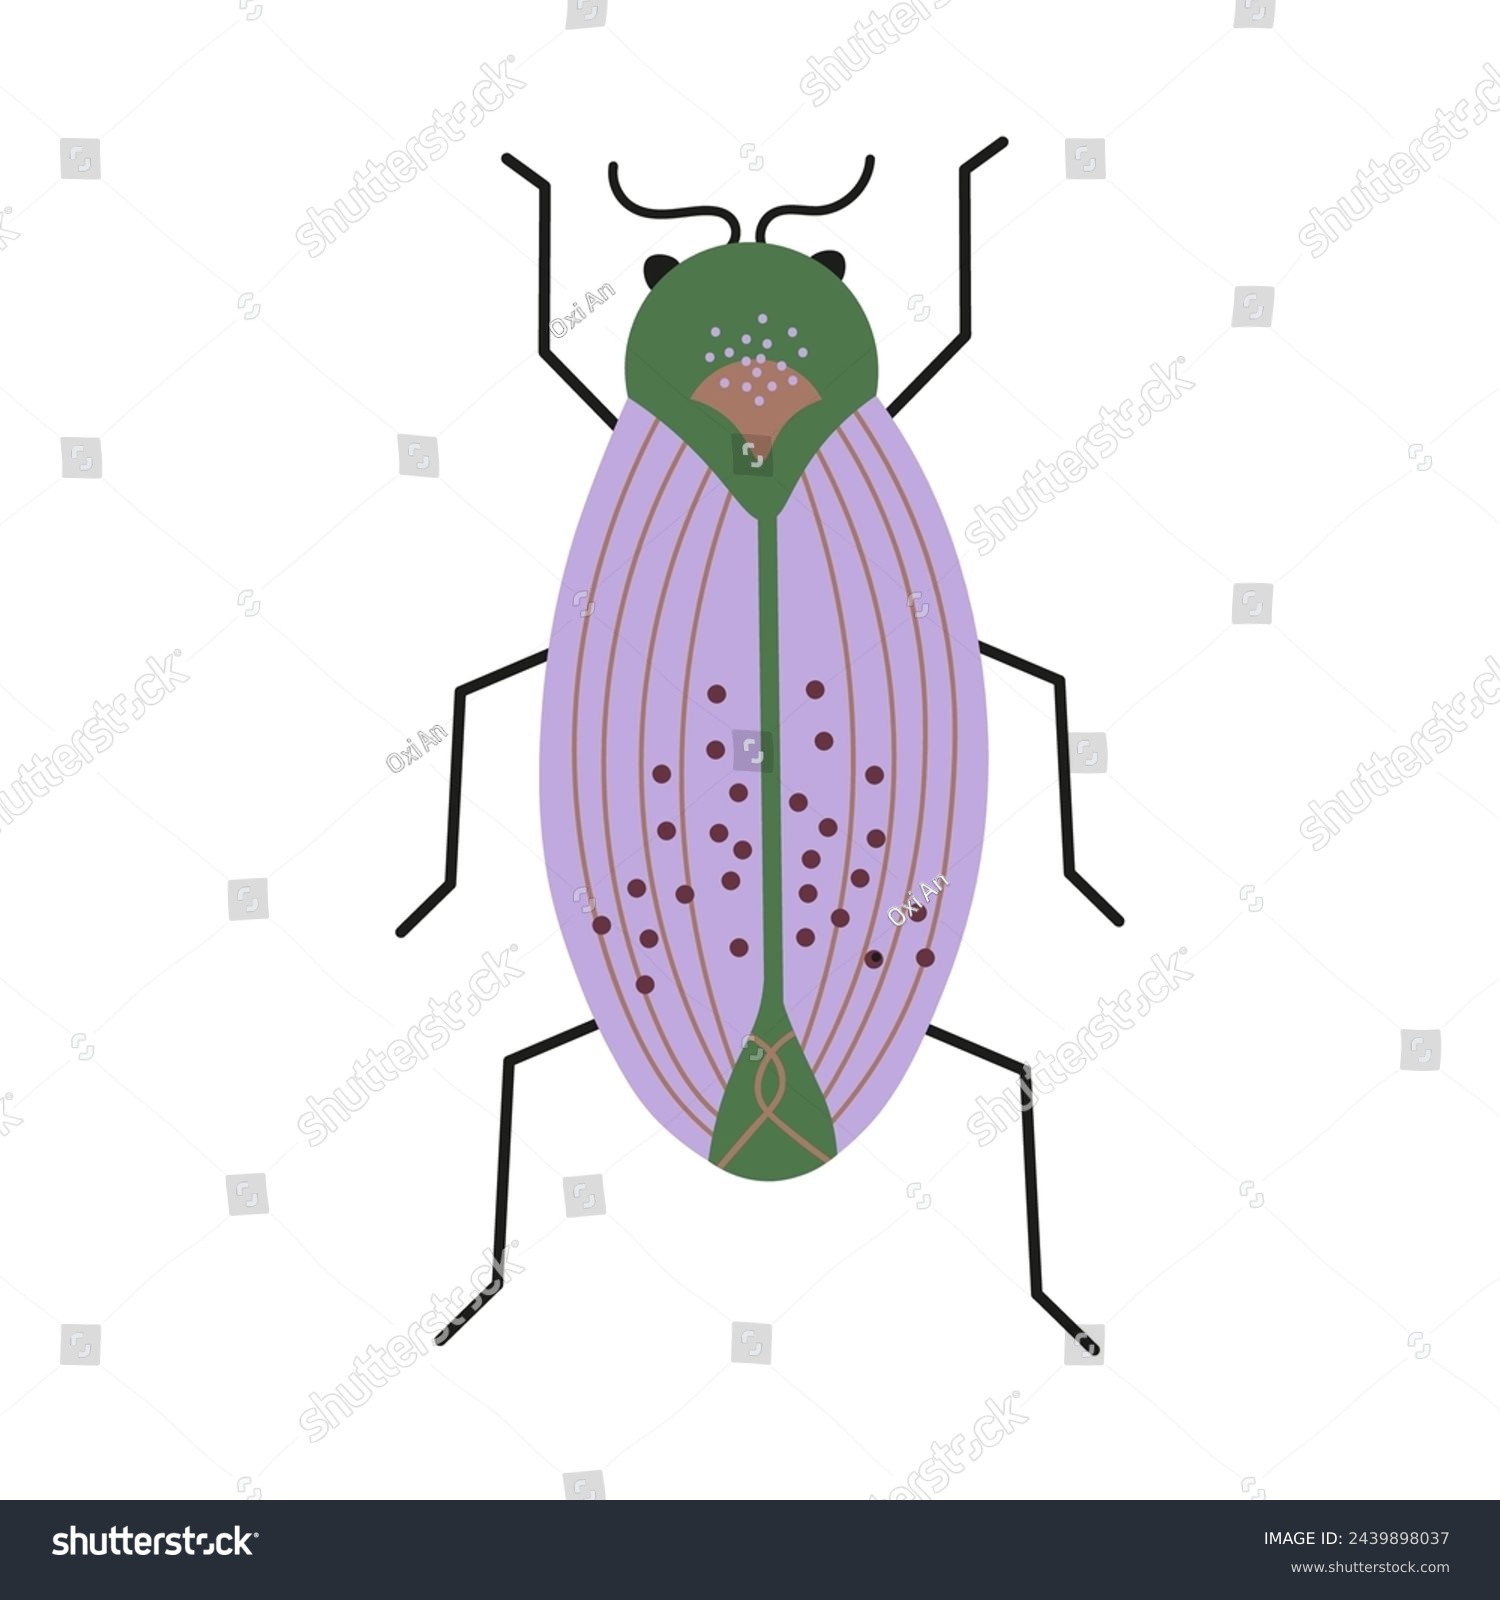 SVG of Beetle hand drawn flat vector illustration, fantastic bug on isolated background. Decorative abstract Insect, fantasy fauna species, wild life, animal. For icon, logo, card, print, paper, flyer, sign svg